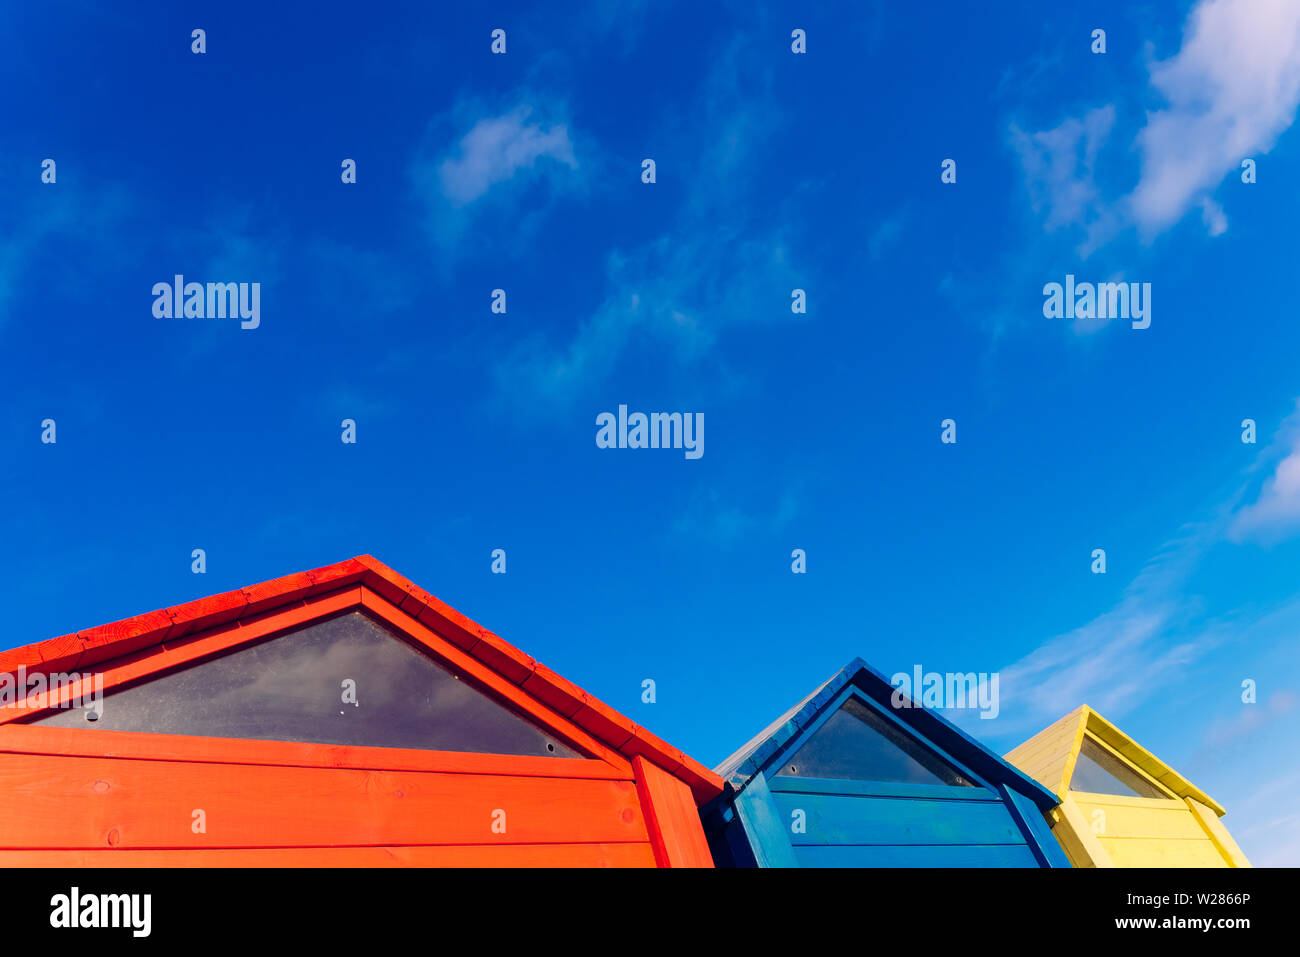 Strange design of colorful wooden triangular boards with blue sky background with clouds. Stock Photo